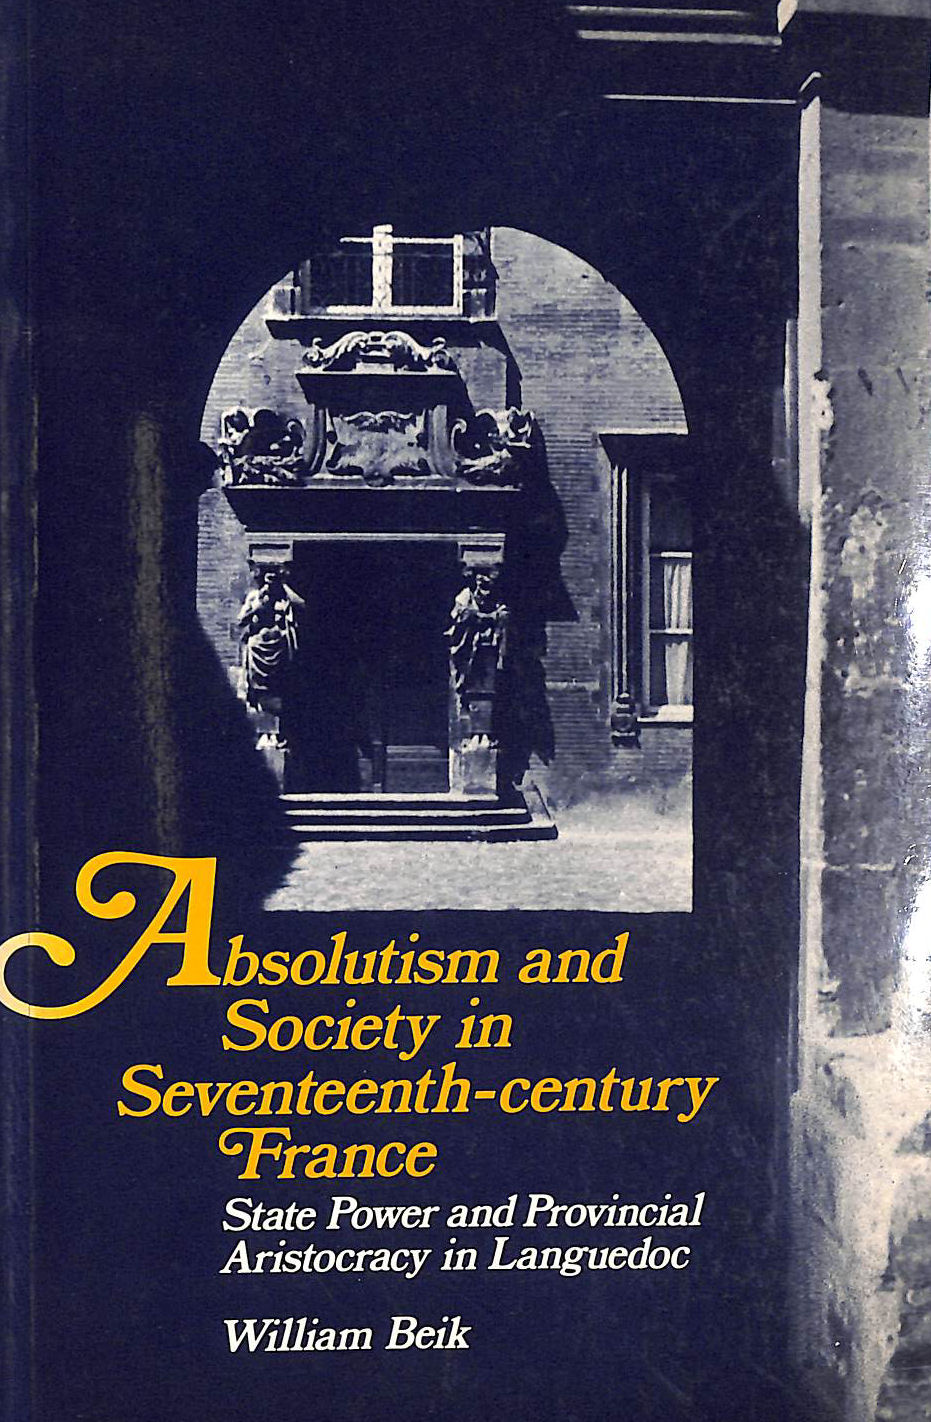 BEIK, WILLIAM - Absolutism and Society in Seventeenth-Century France: State Power and Provincial Aristocracy in Languedoc (Cambridge Studies in Early Modern History)